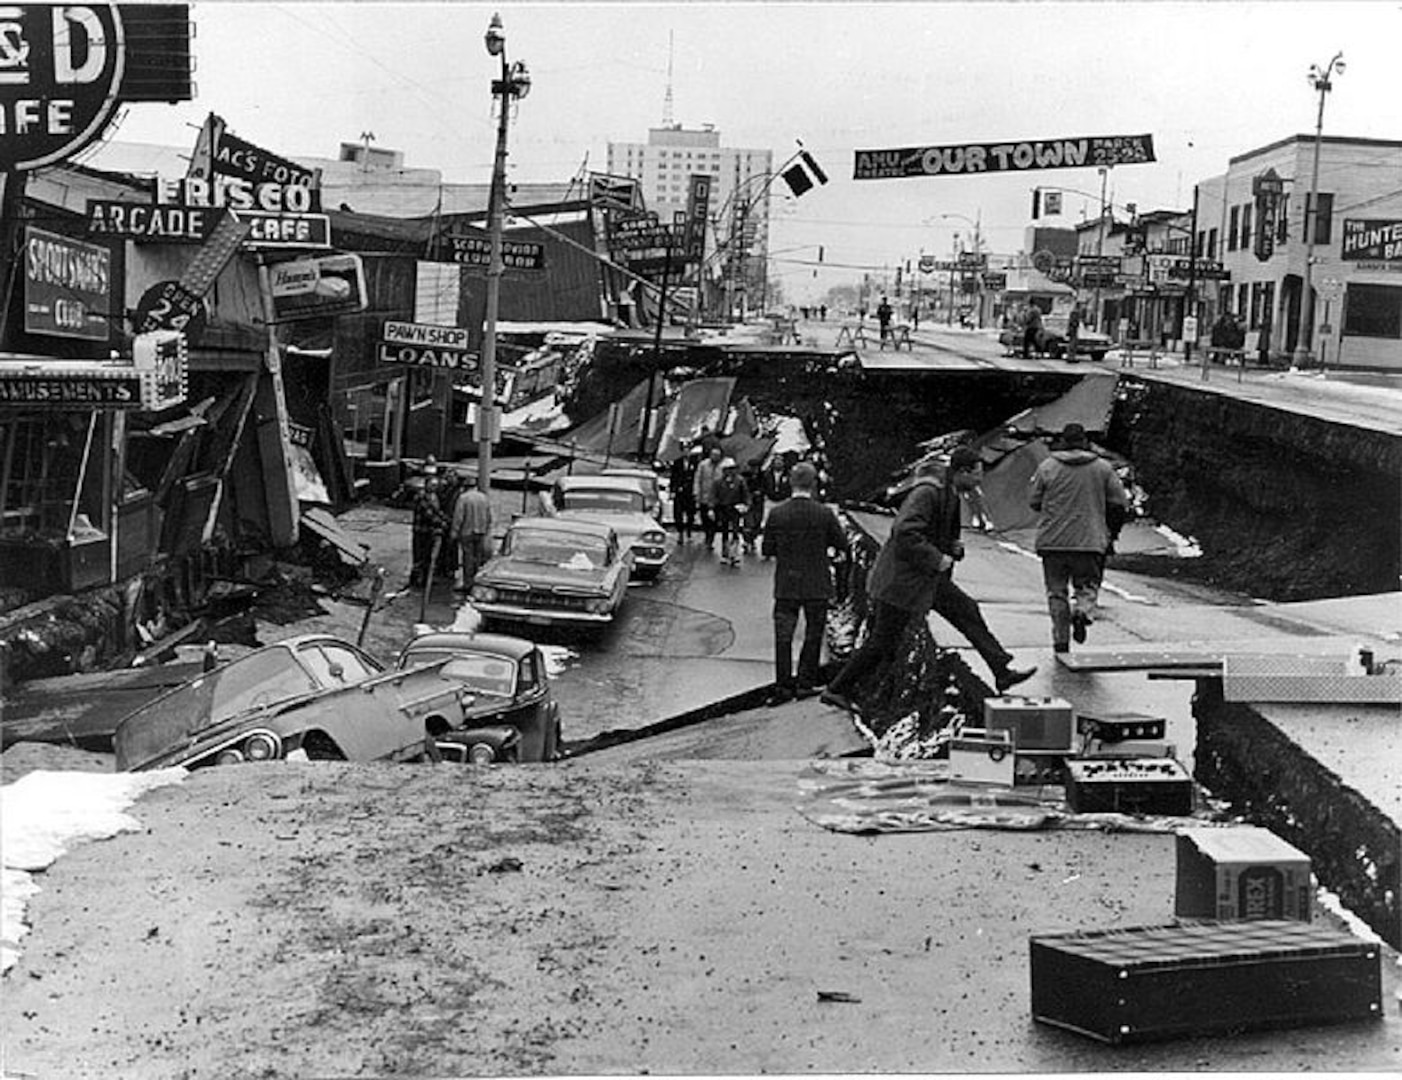 The earthquake's aftermath on Fourth Avenue in Anchorage. The quake caused a landslide, which caused the level of the road to drop.